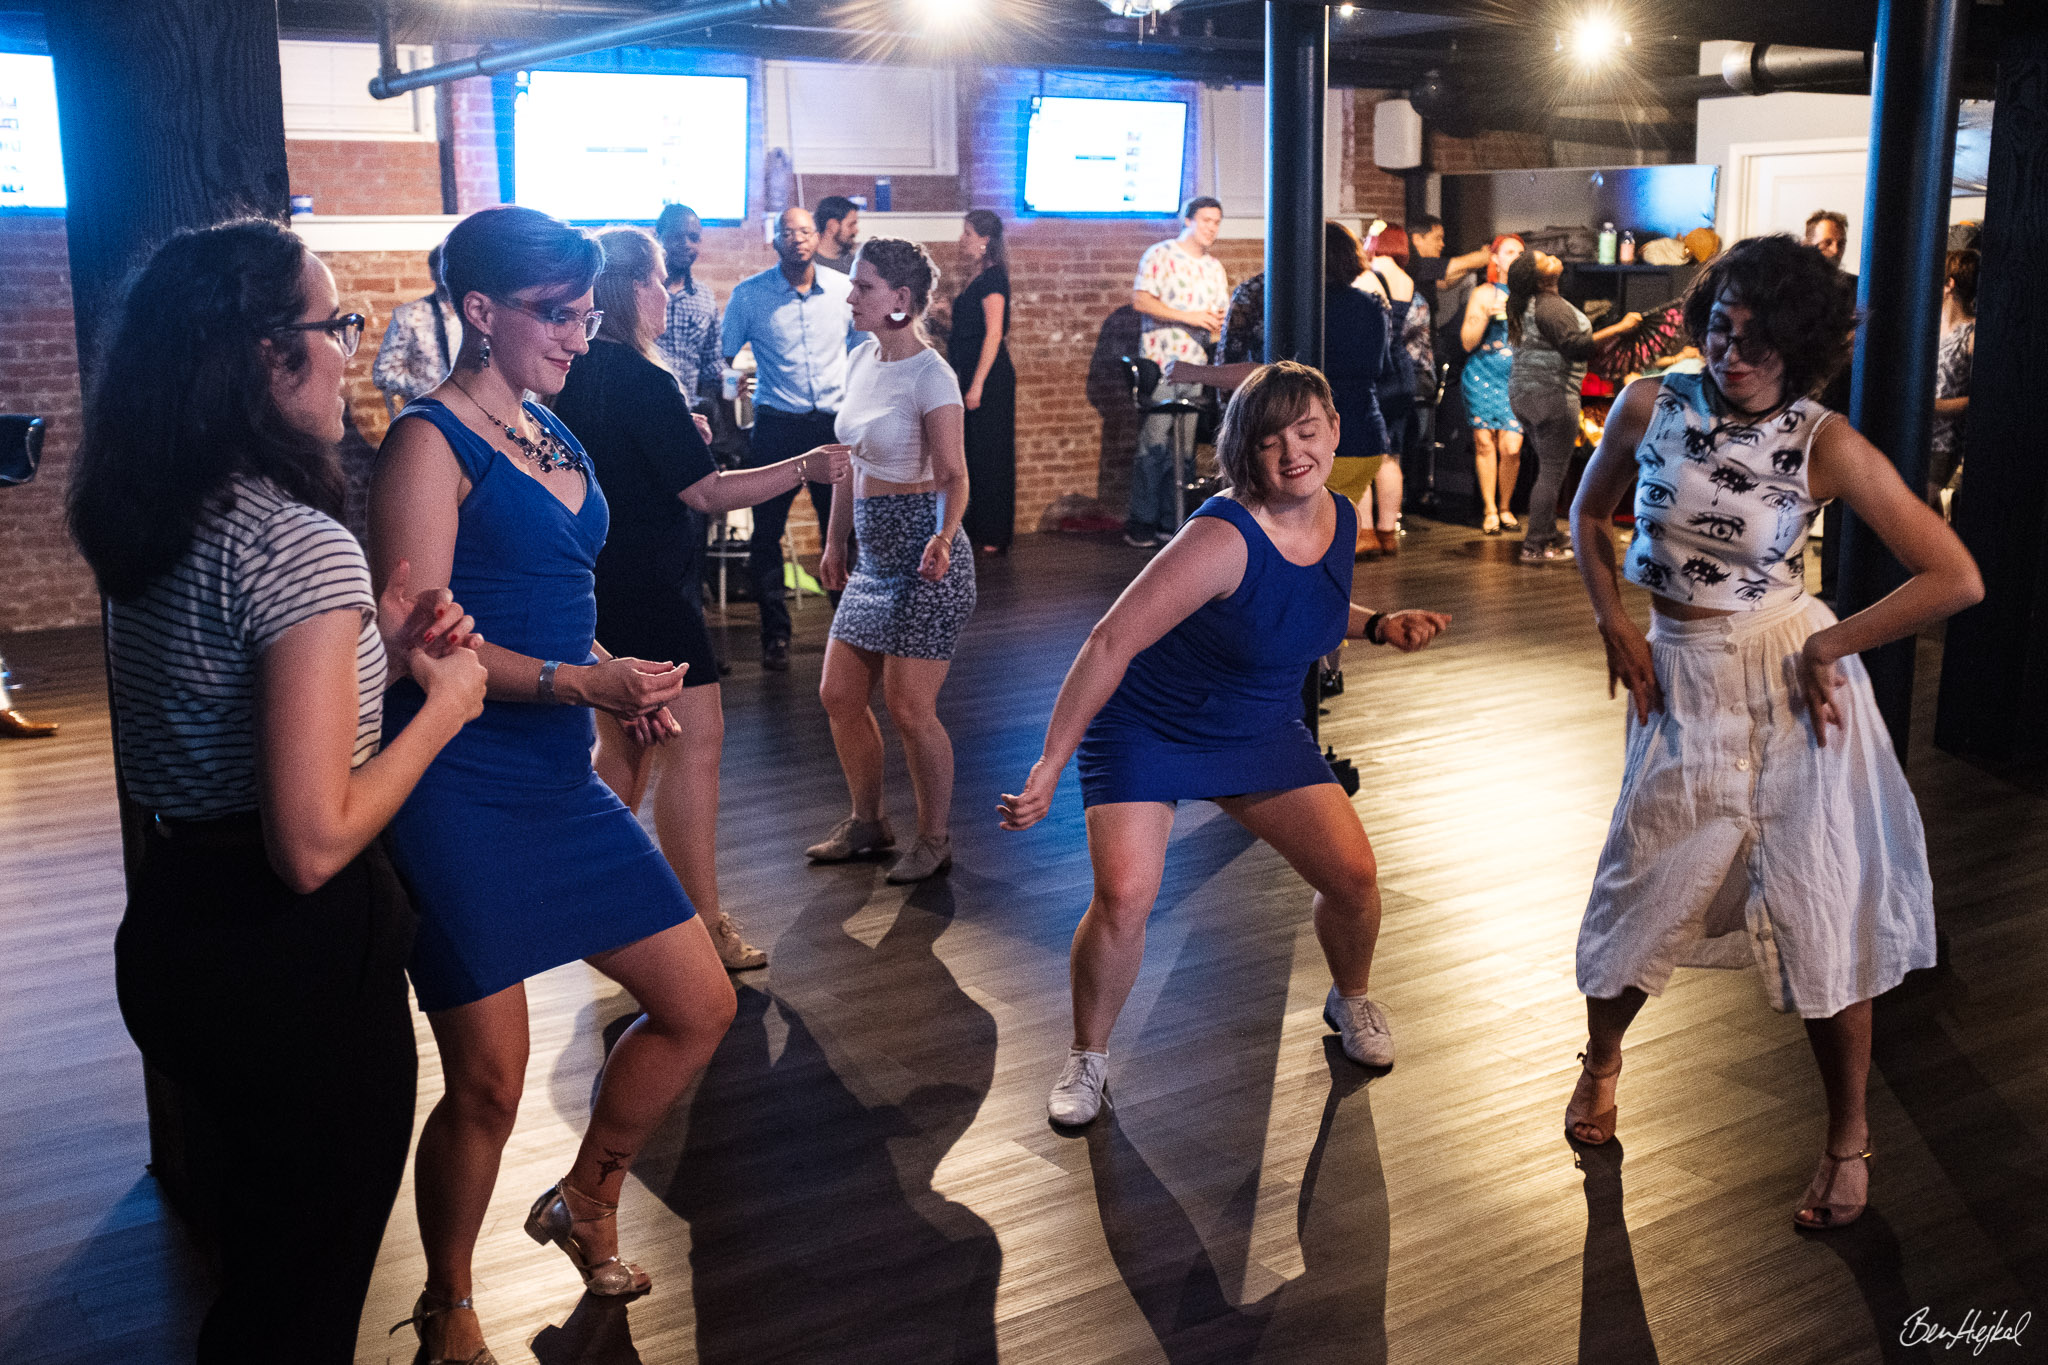 A full dance floor at a dance event. In the center of the frame four femmes dance solo, riffing on one another's moves.